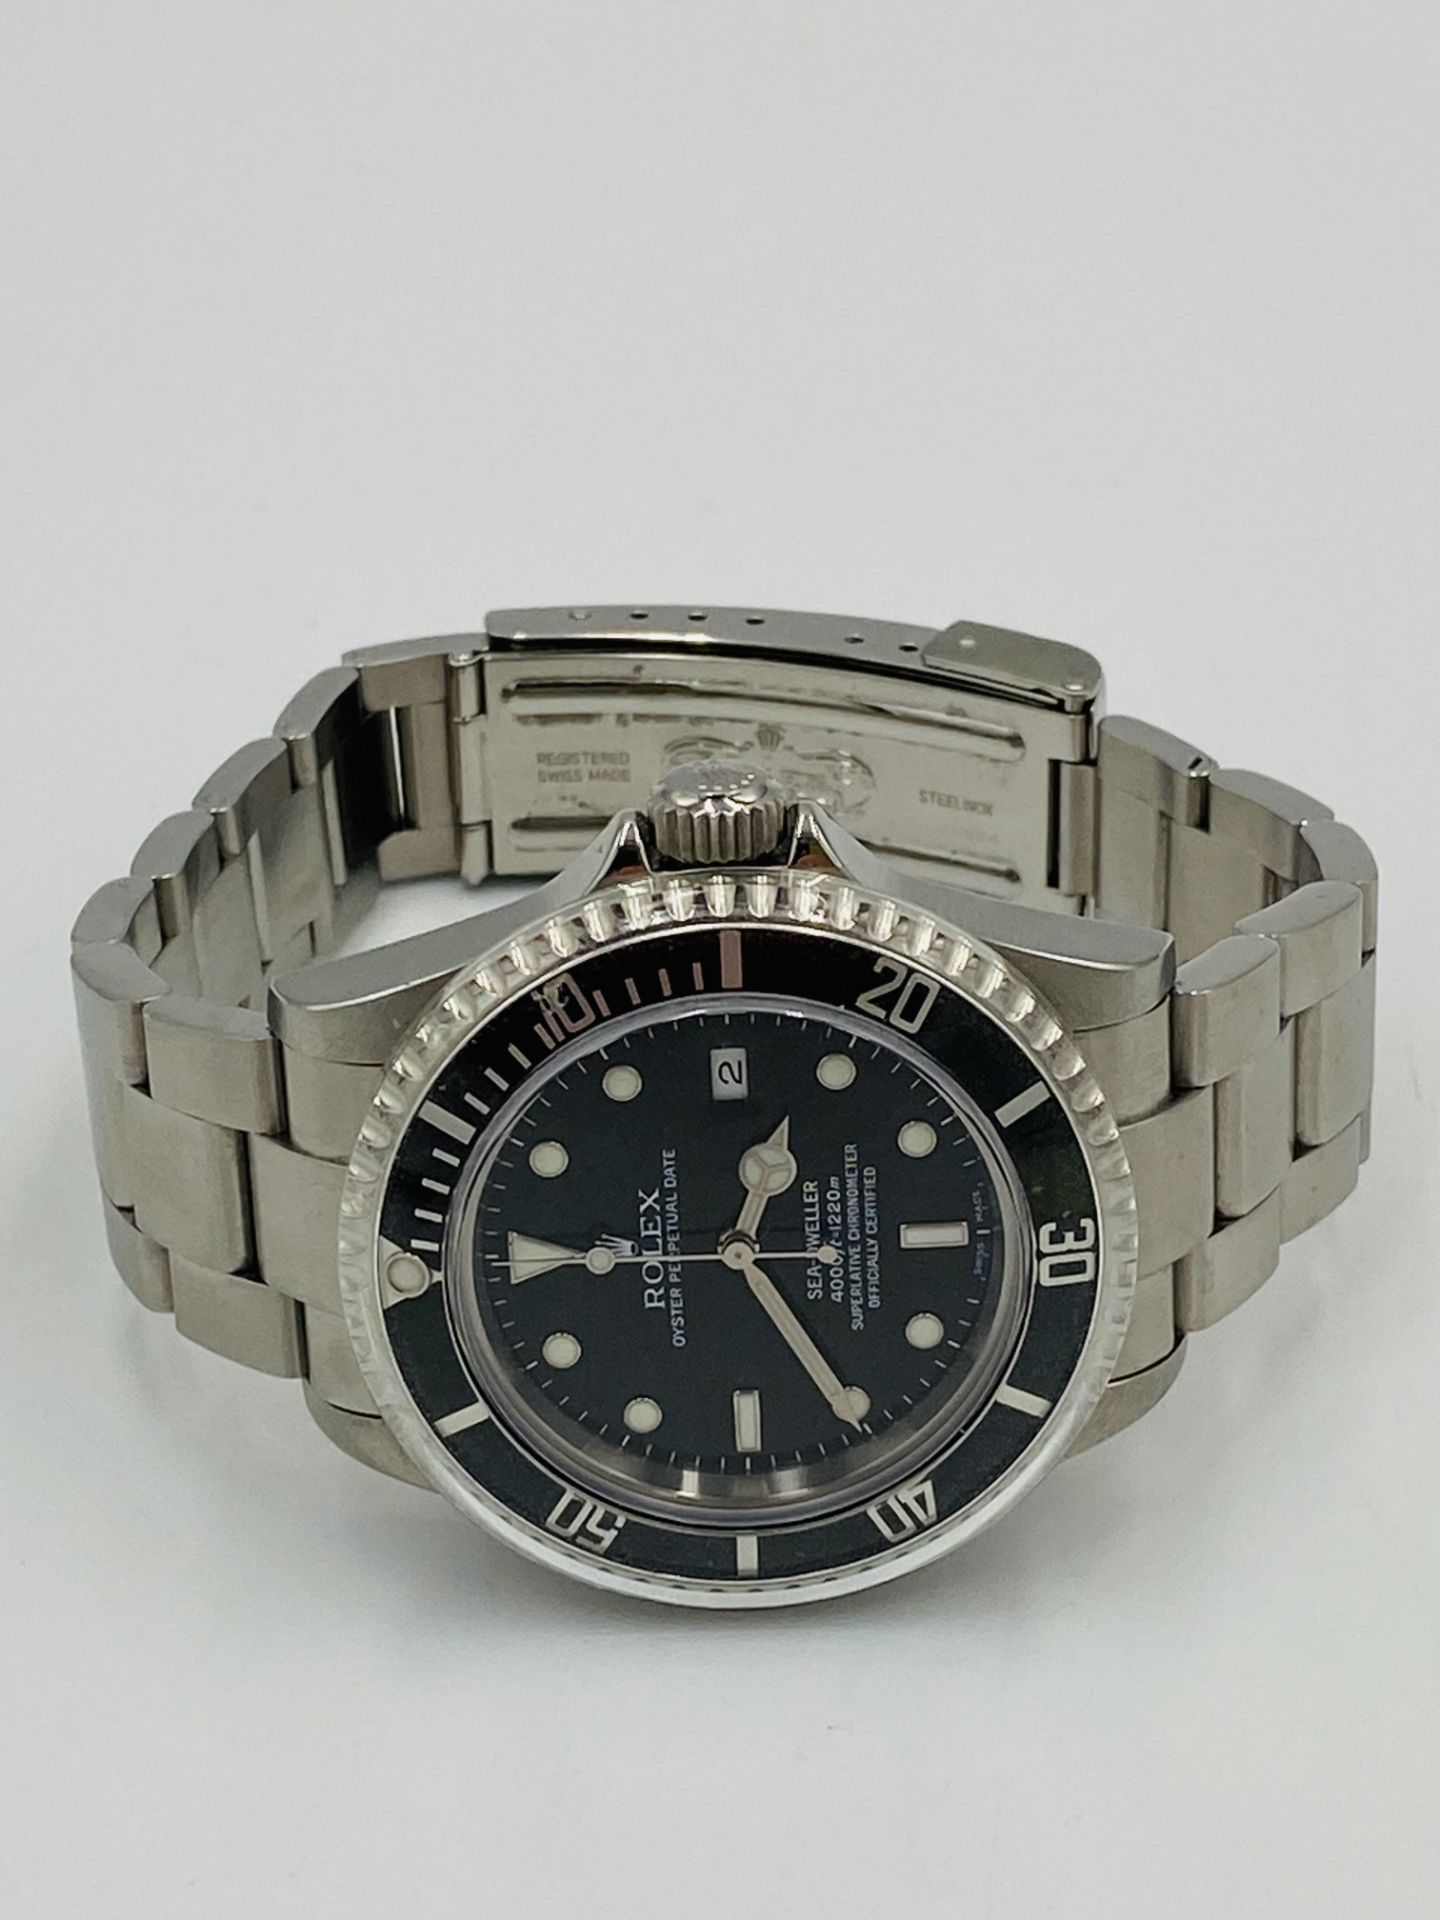 Rolex Oyster Perpetual Date Sea Dweller stainless steel wristwatch - Image 6 of 6